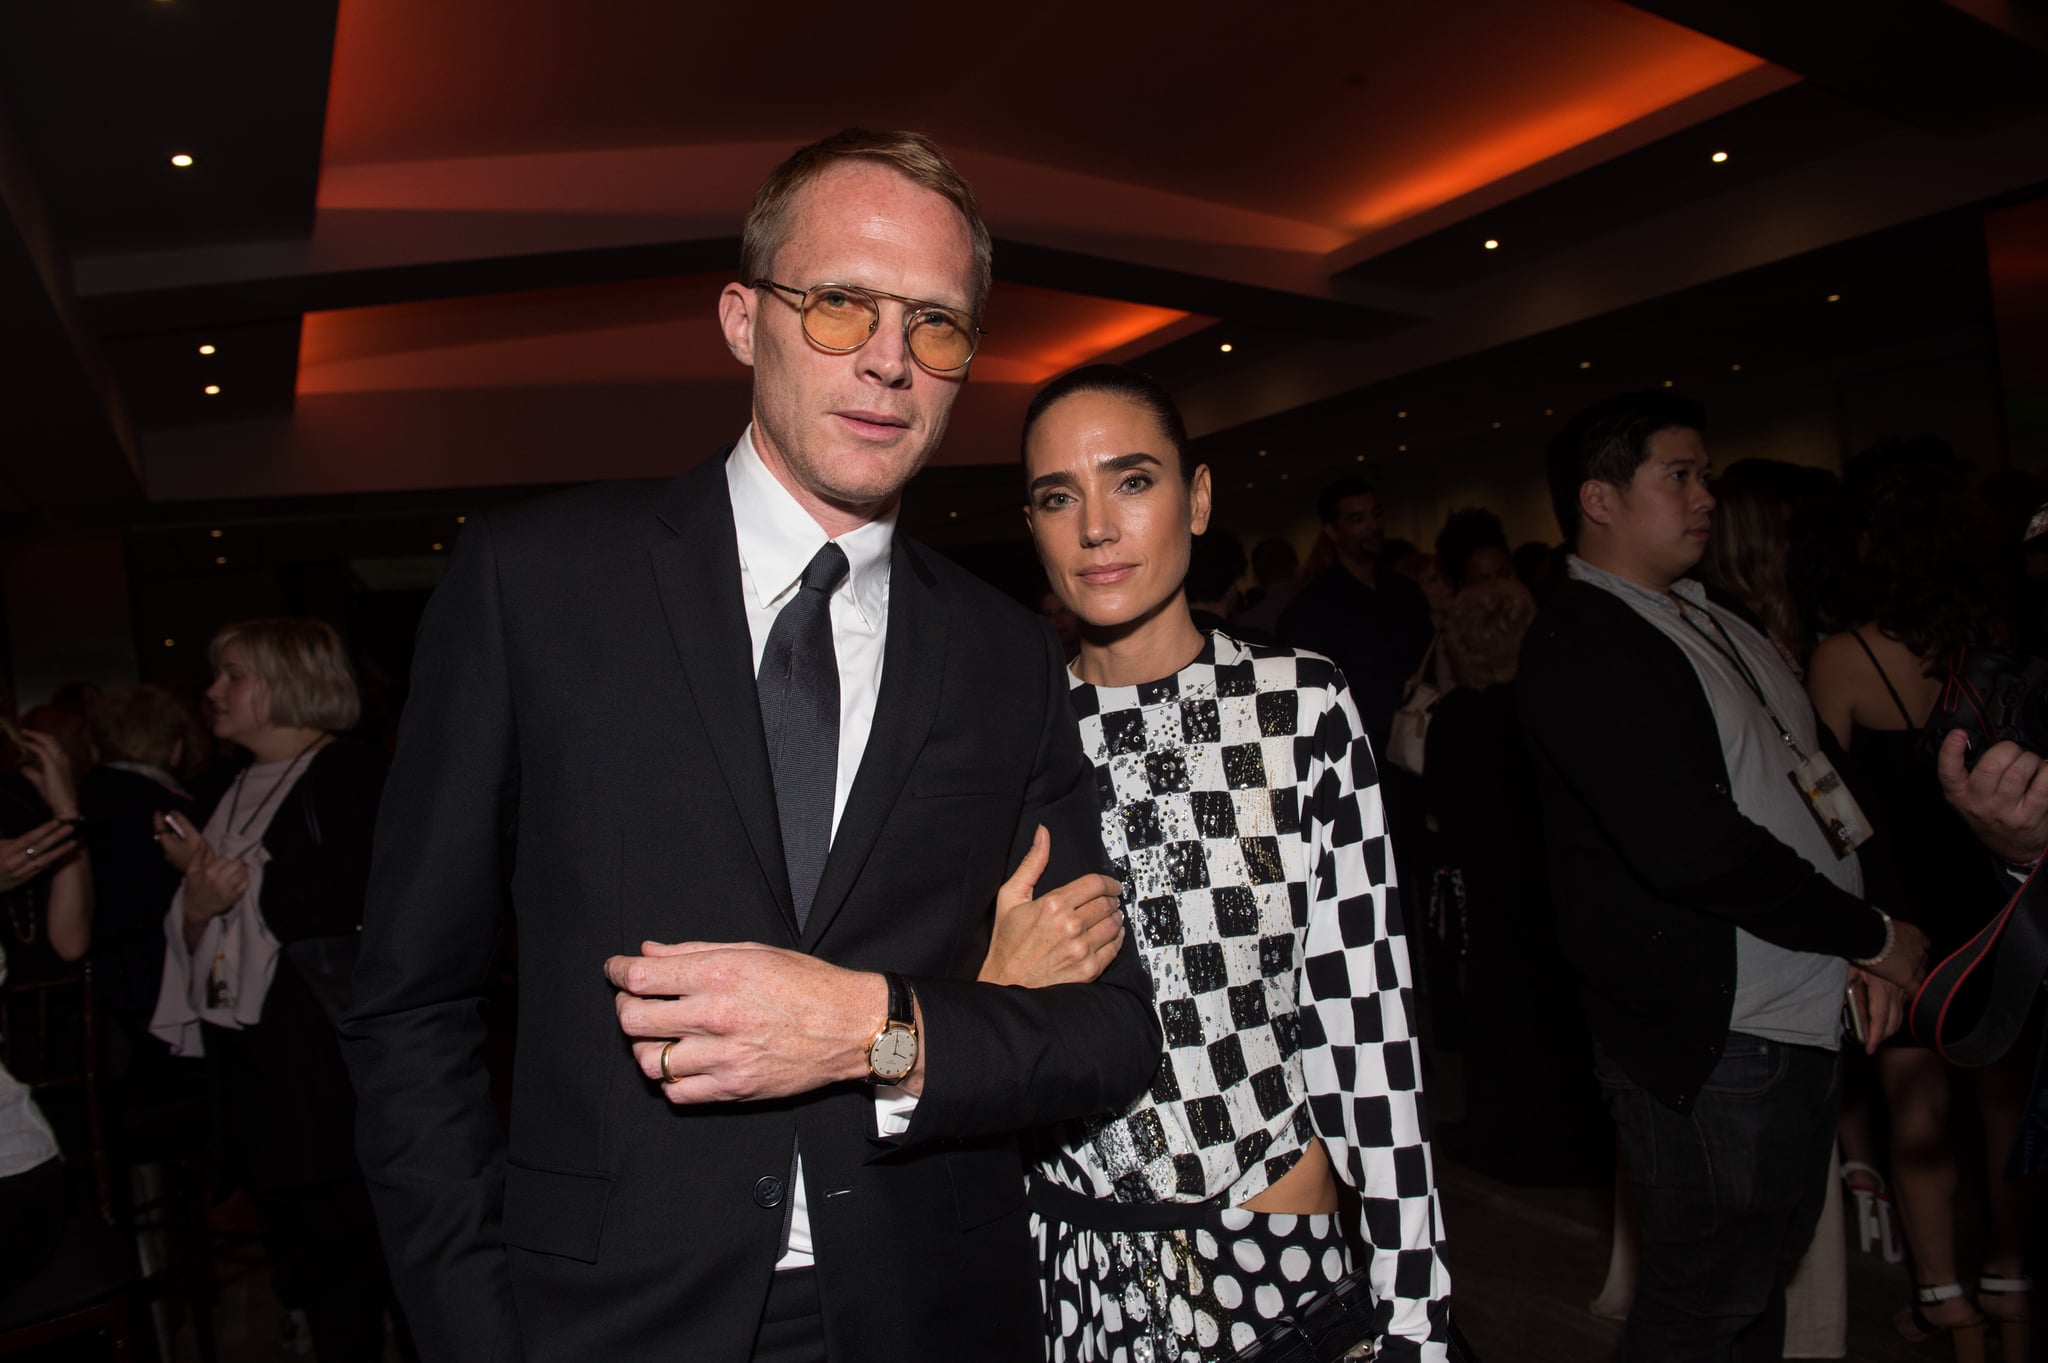 BEVERLY HILLS, CA - OCTOBER 13:  Actors Paul Bettany (L) and Jennifer Connelly attend the after party for the premiere of Lionsgate's 'American Pastoral' on October 13, 2016 in Beverly Hills, California.  (Photo by Emma McIntyre/Getty Images)